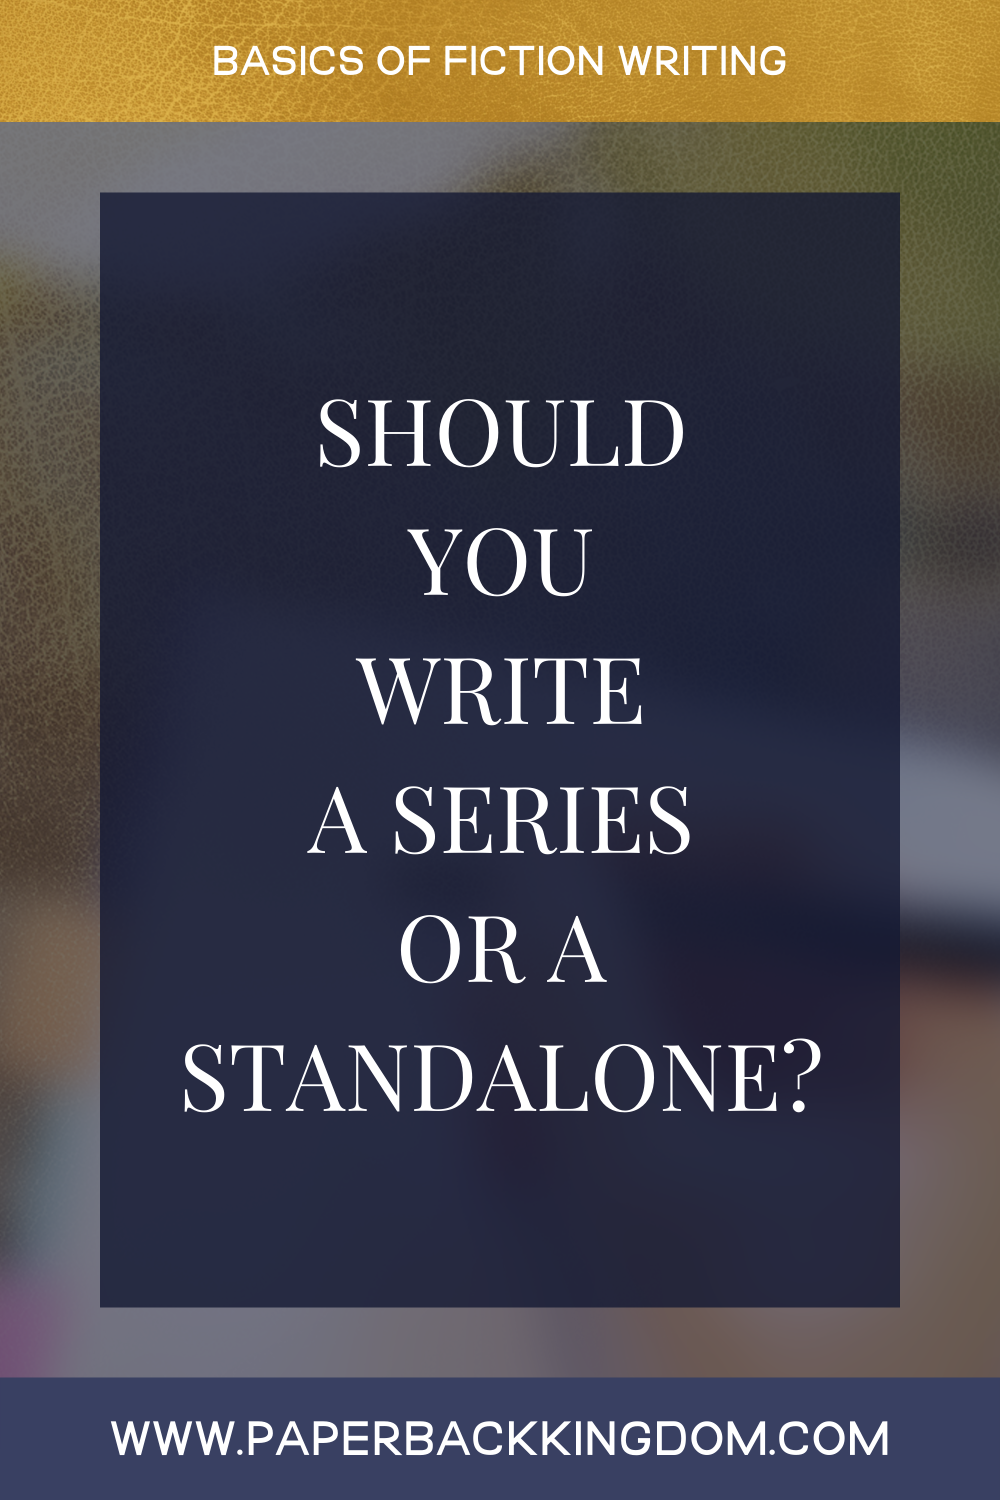 Should You Write A Series Or Standalone? - Sometimes, we don't set out to write more than one book, but we feel compelled to continue the story. That is our creative flow talking, our imaginations conjuring more ideas than we can keep up with. So if you're debating whether to write a standalone or a series, let me give you some guidelines to help you make a decision.